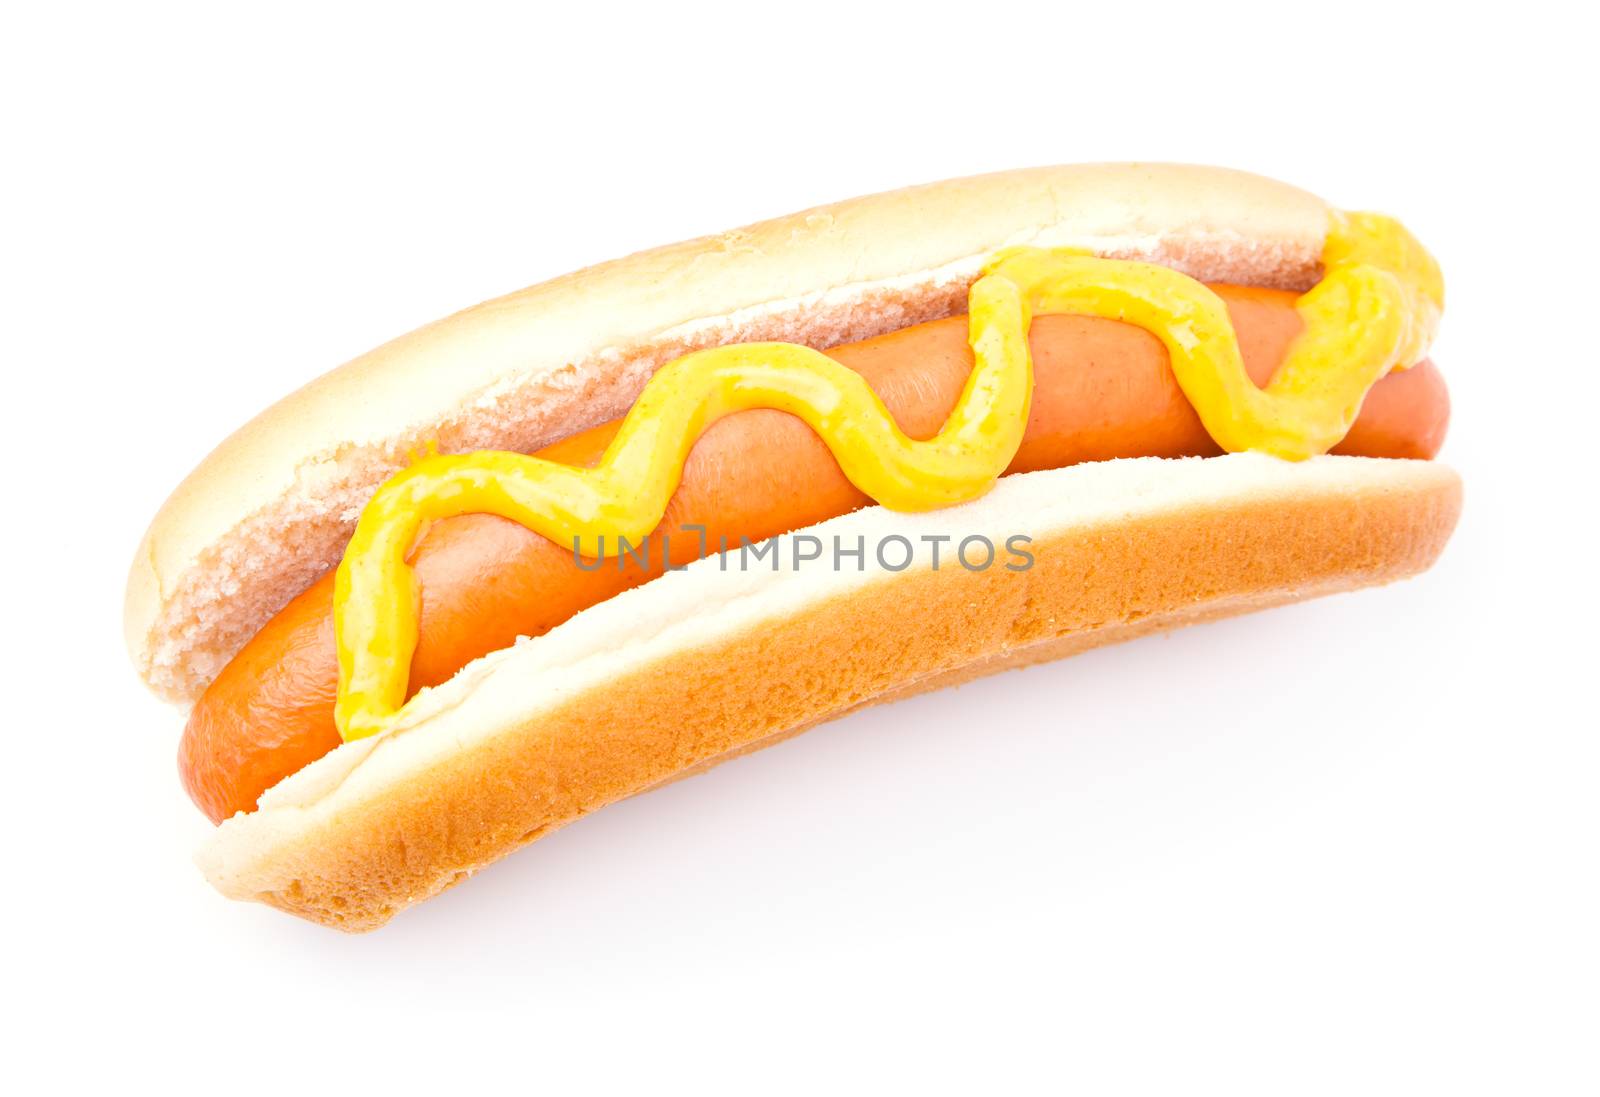 Hot dog with vegetables on a white background by motorolka